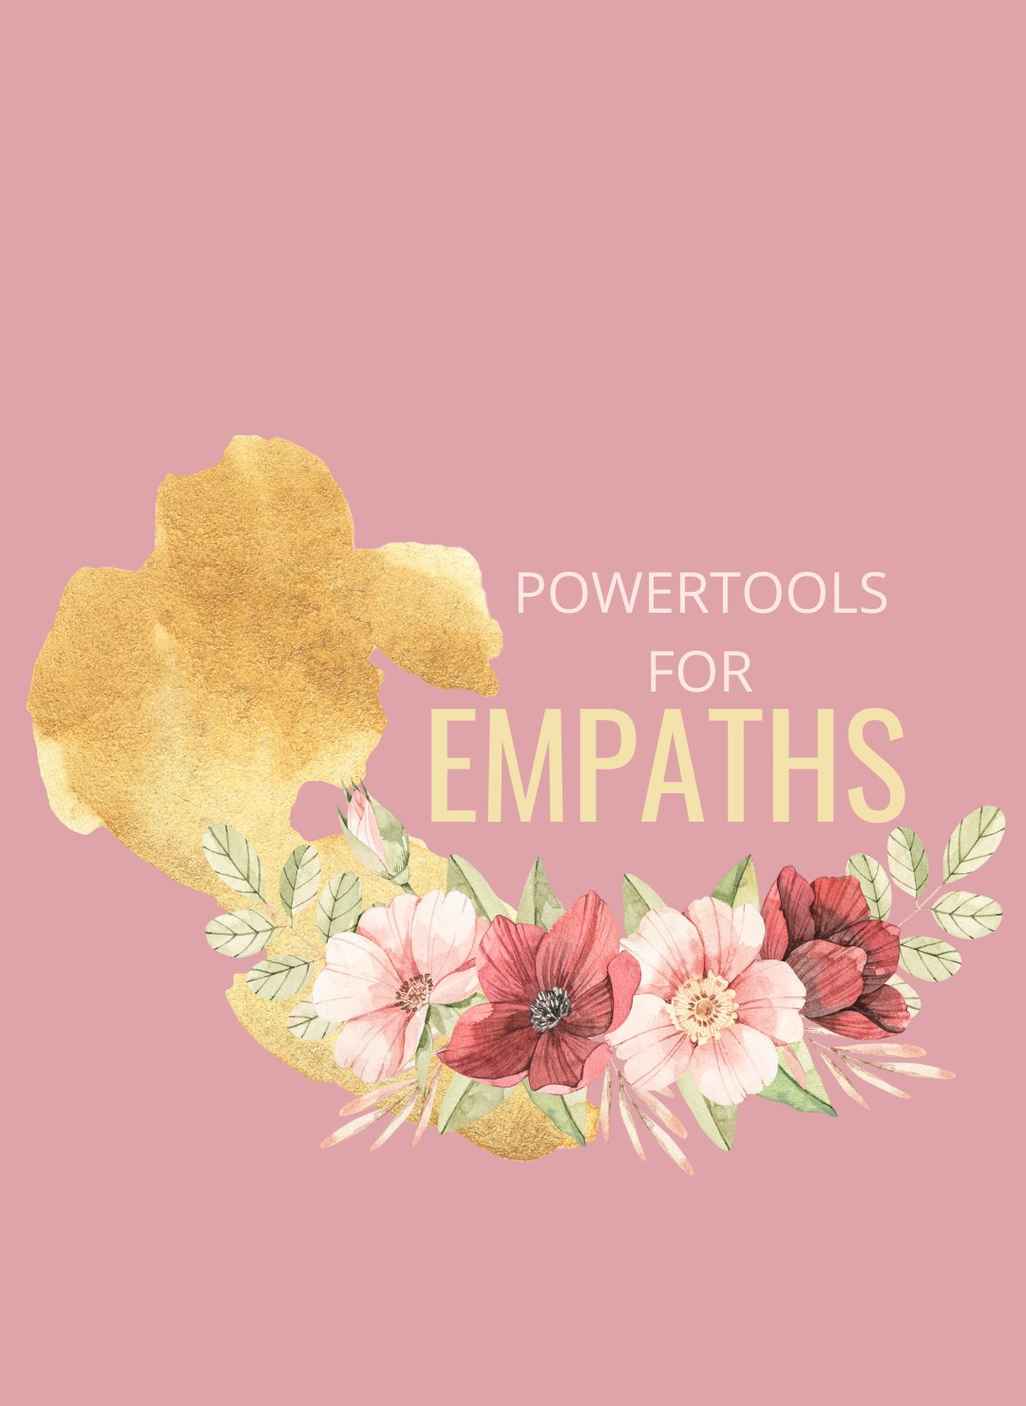 Powerful tools for empaths